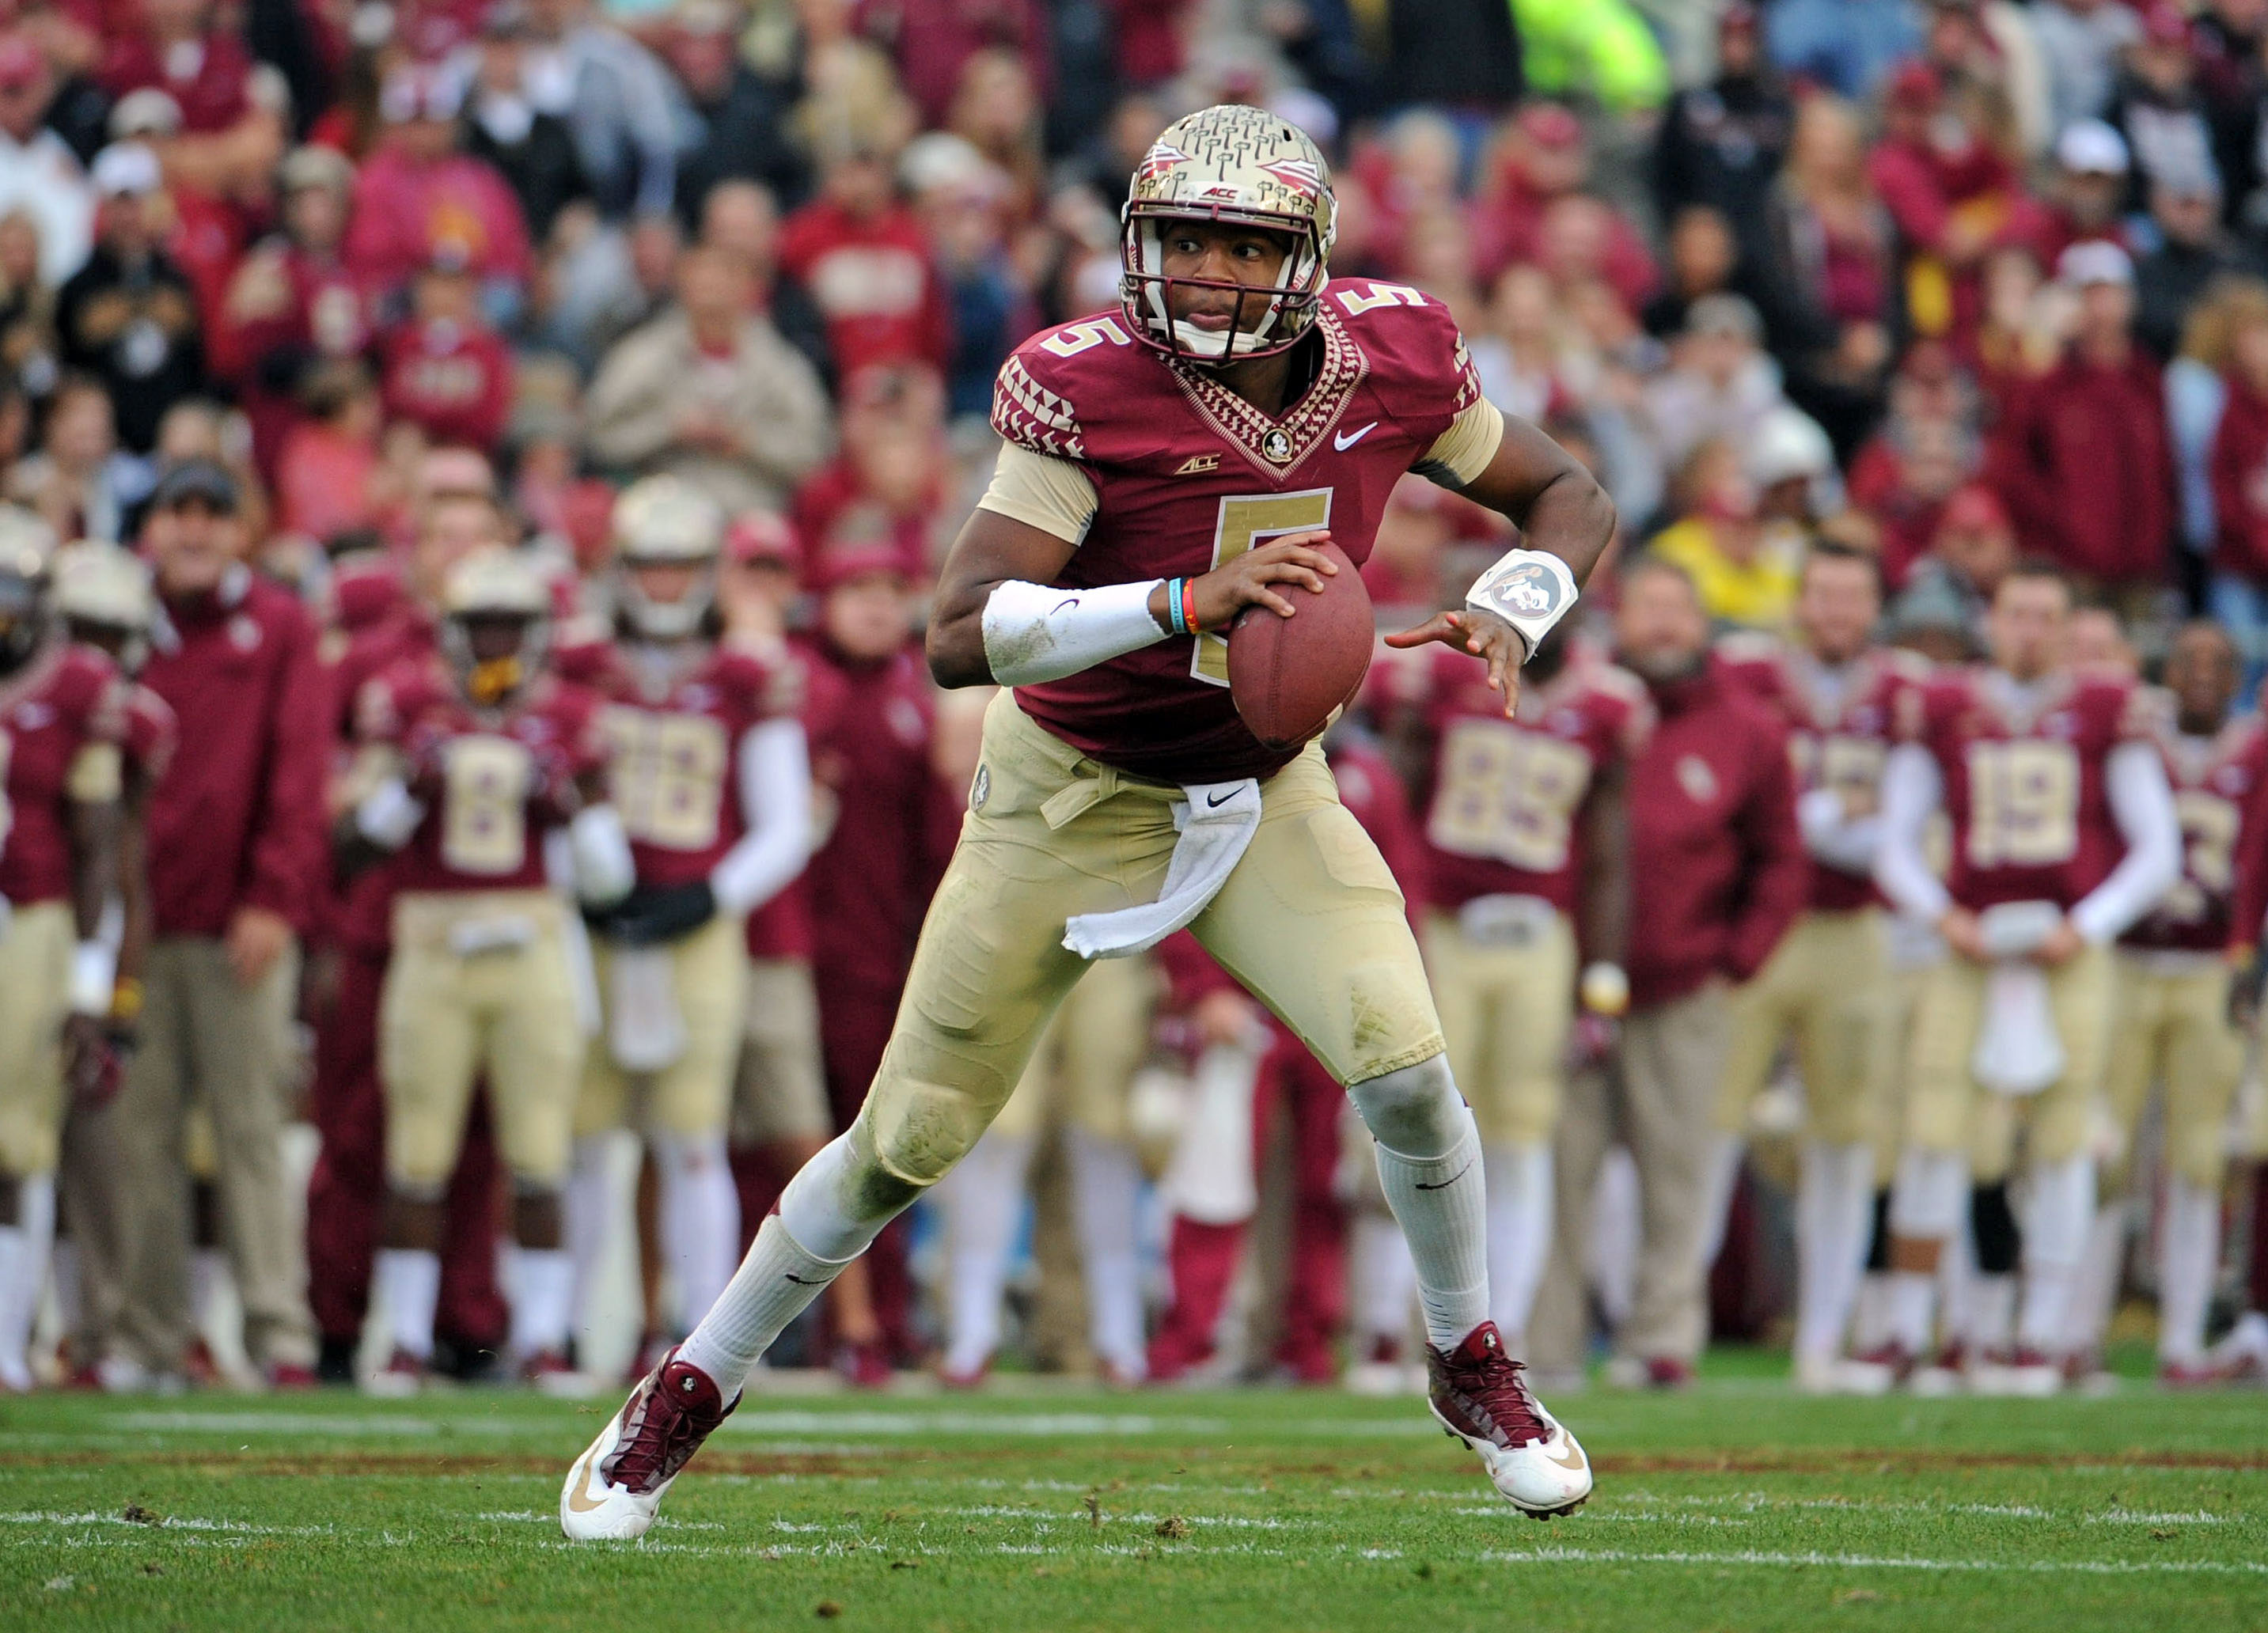 Records shatter and FSU seems unbreakable — Just another week in